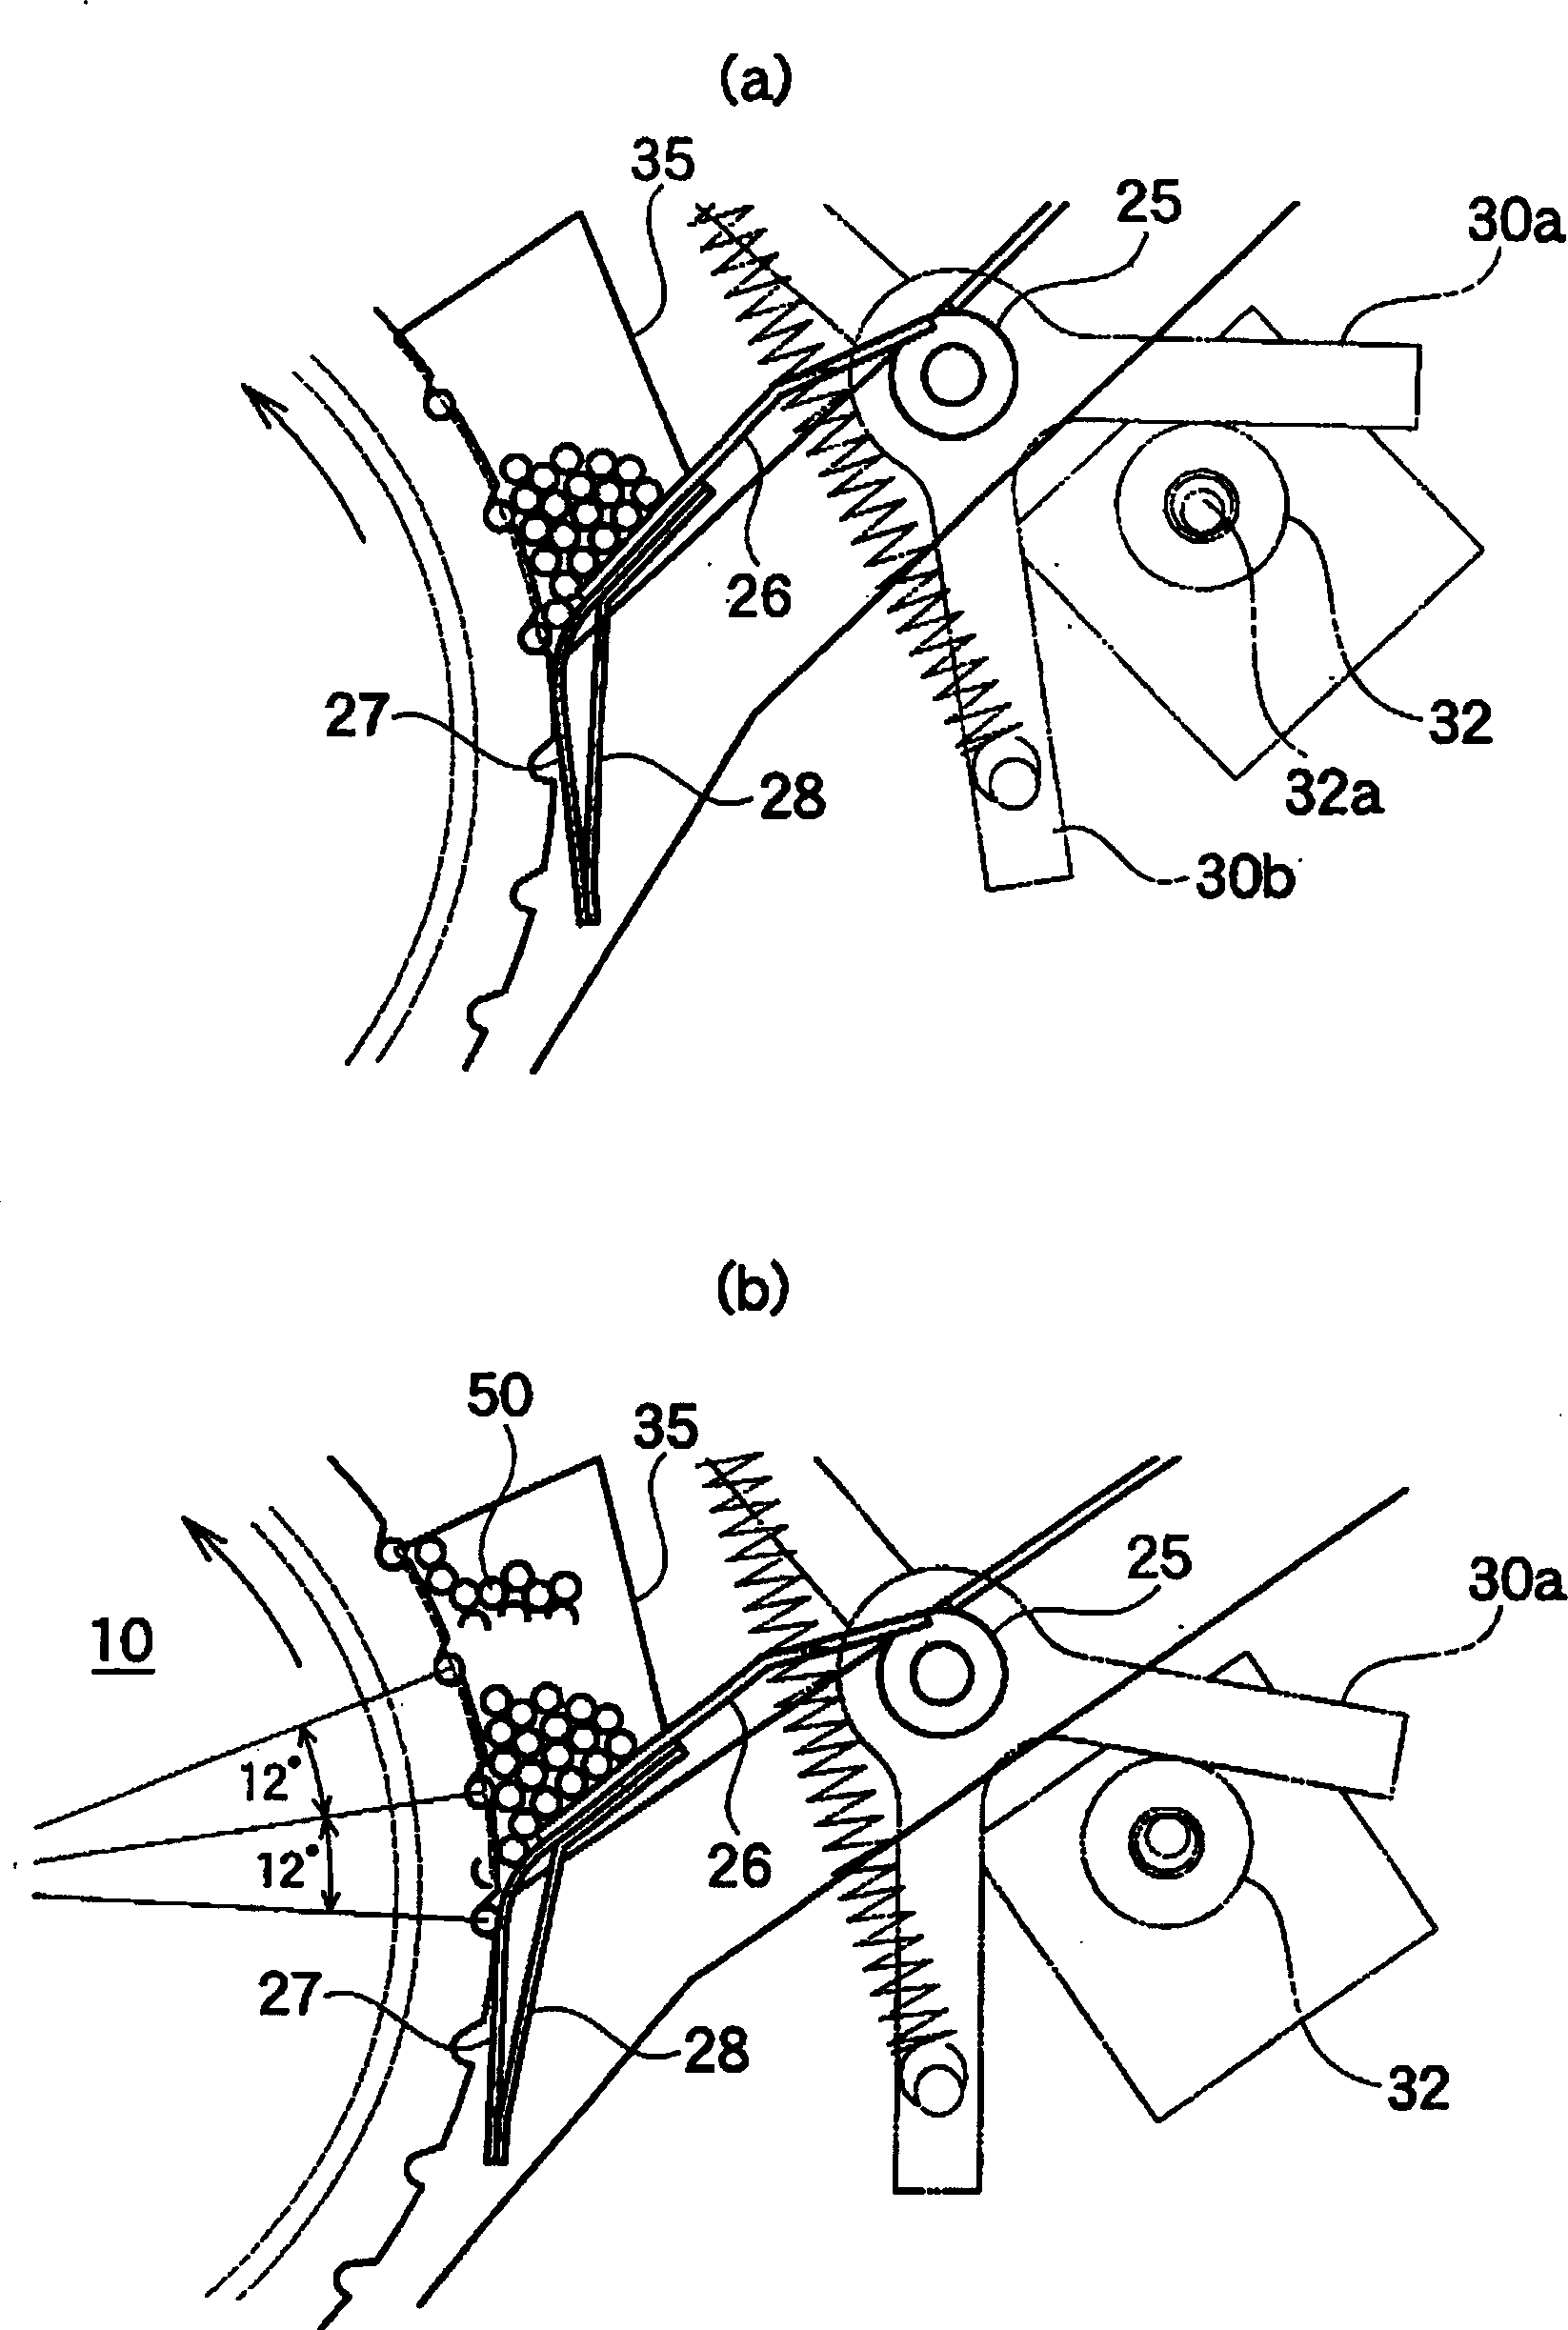 Automatic sphericity falling device and automatic seeding system for plant growth grooved tray